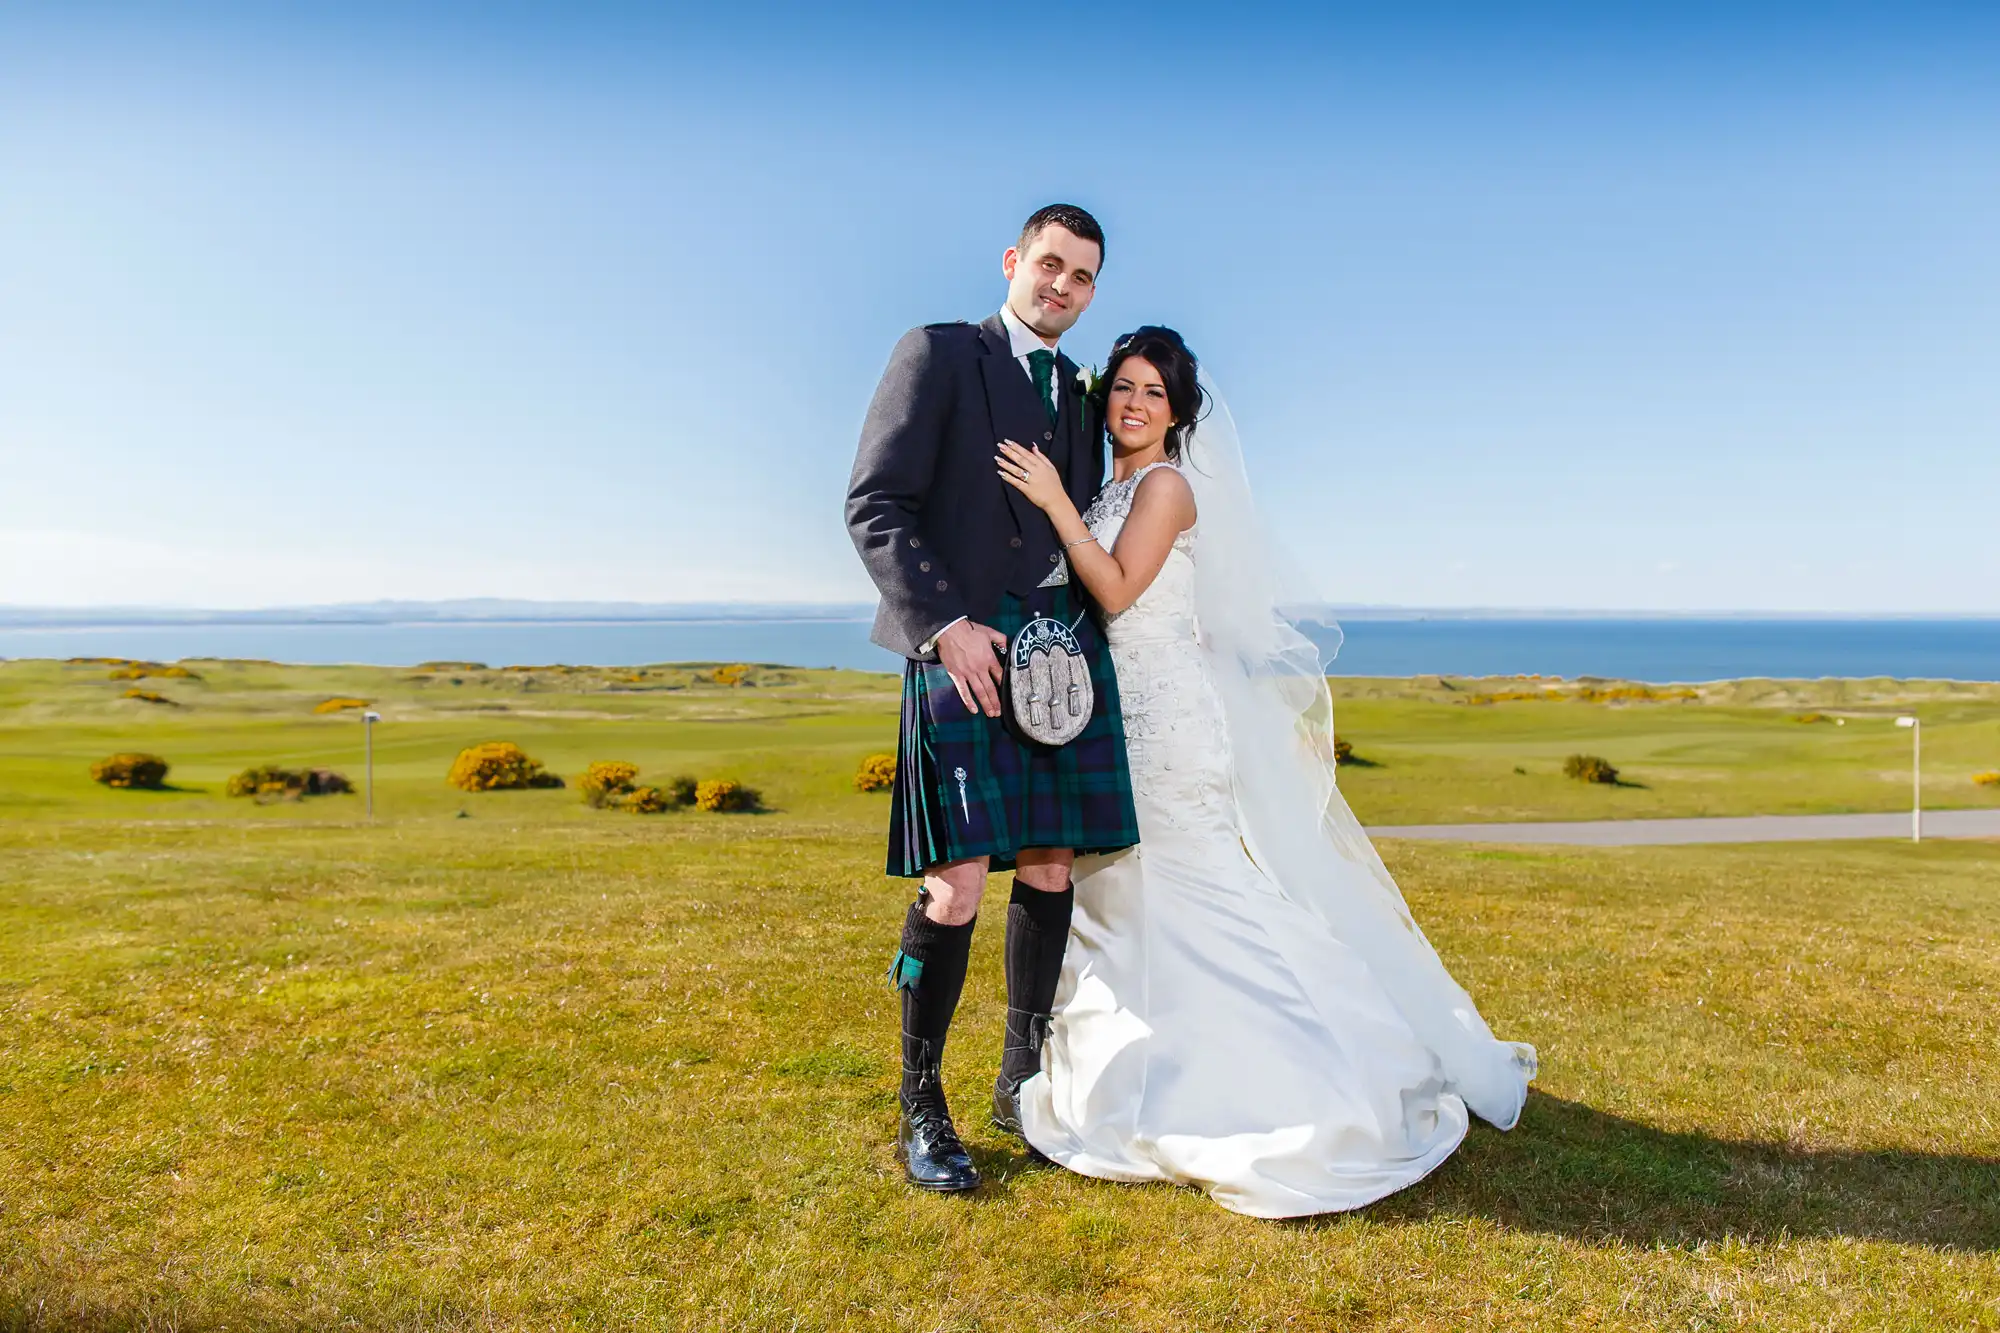 A bride in a white gown and a groom in a traditional scottish kilt posing on a grassy field with the ocean and a clear sky in the background.